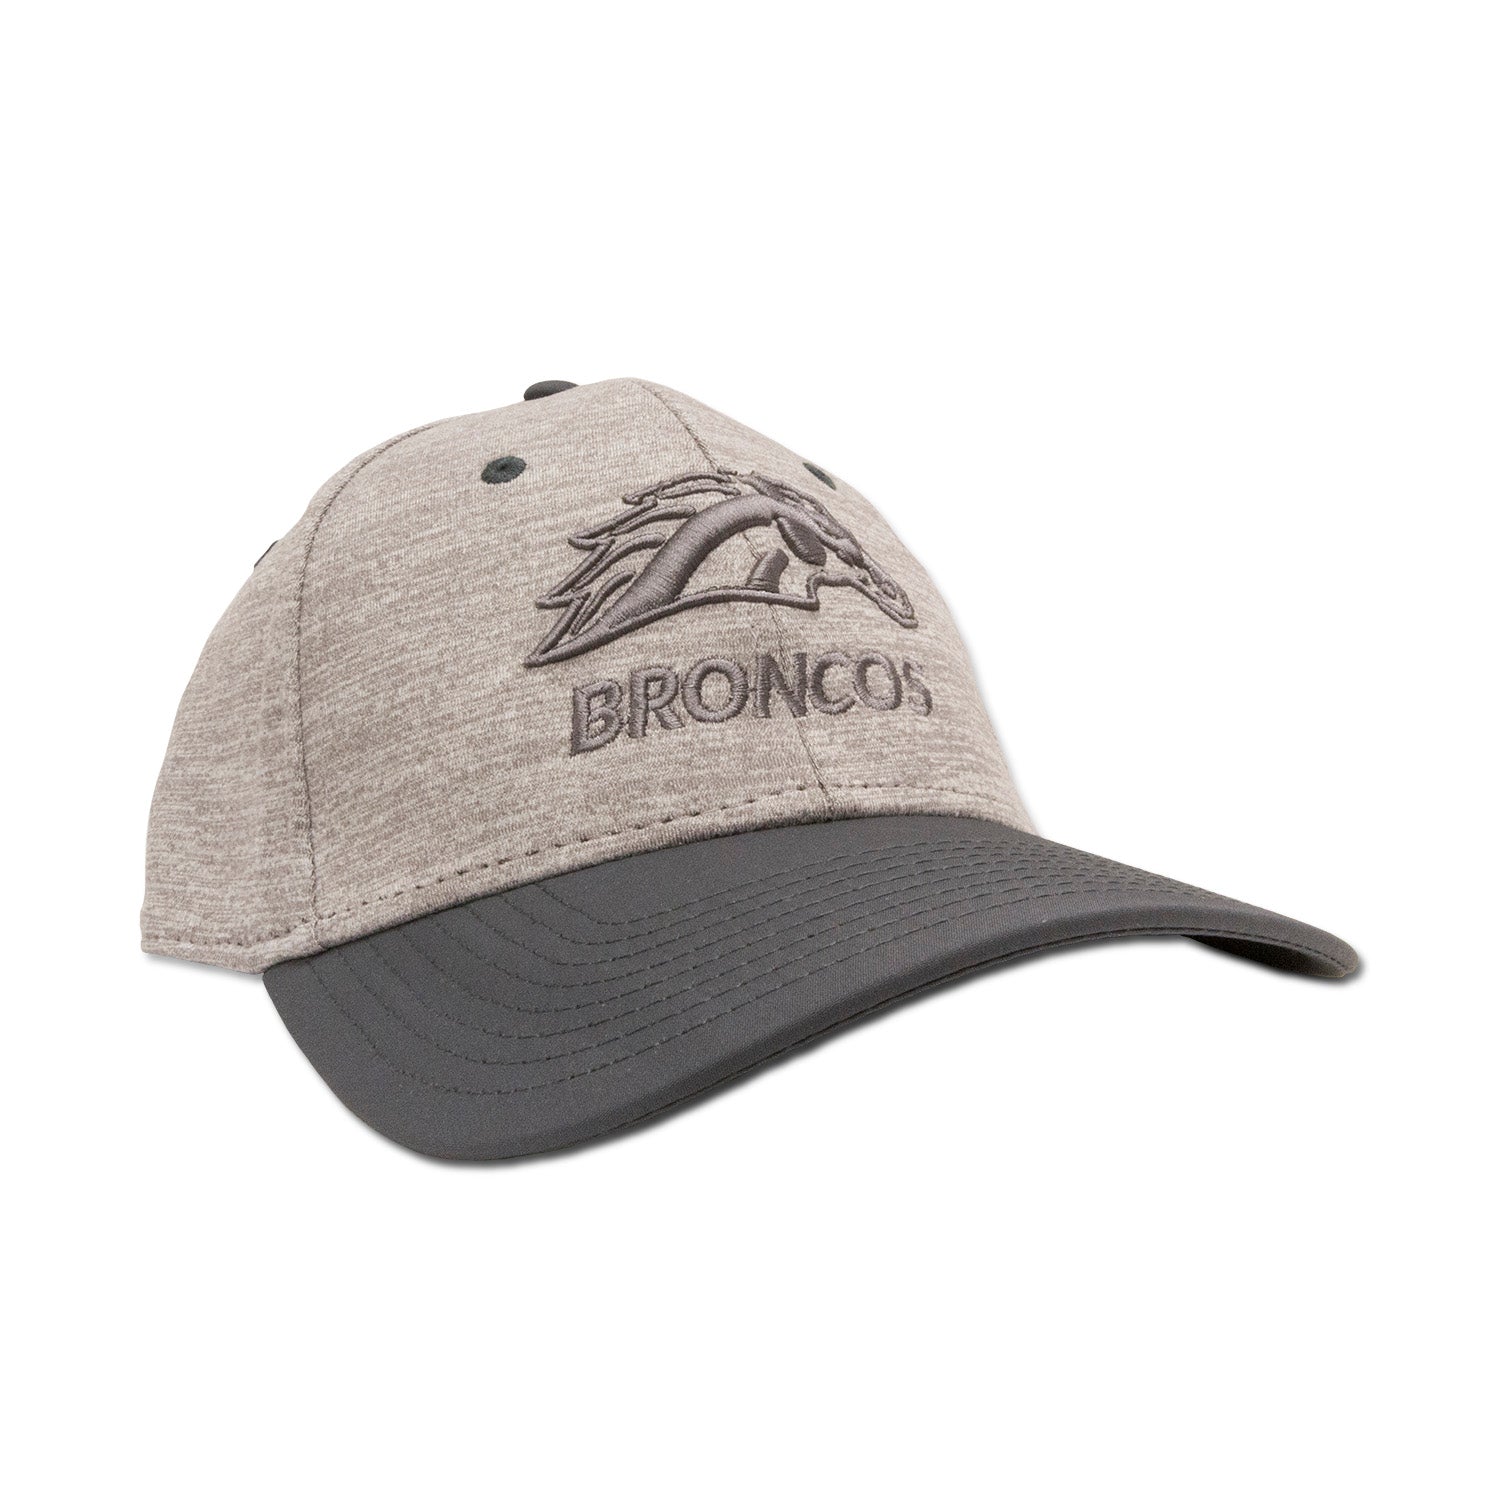 3D Bronco Fitted Cap